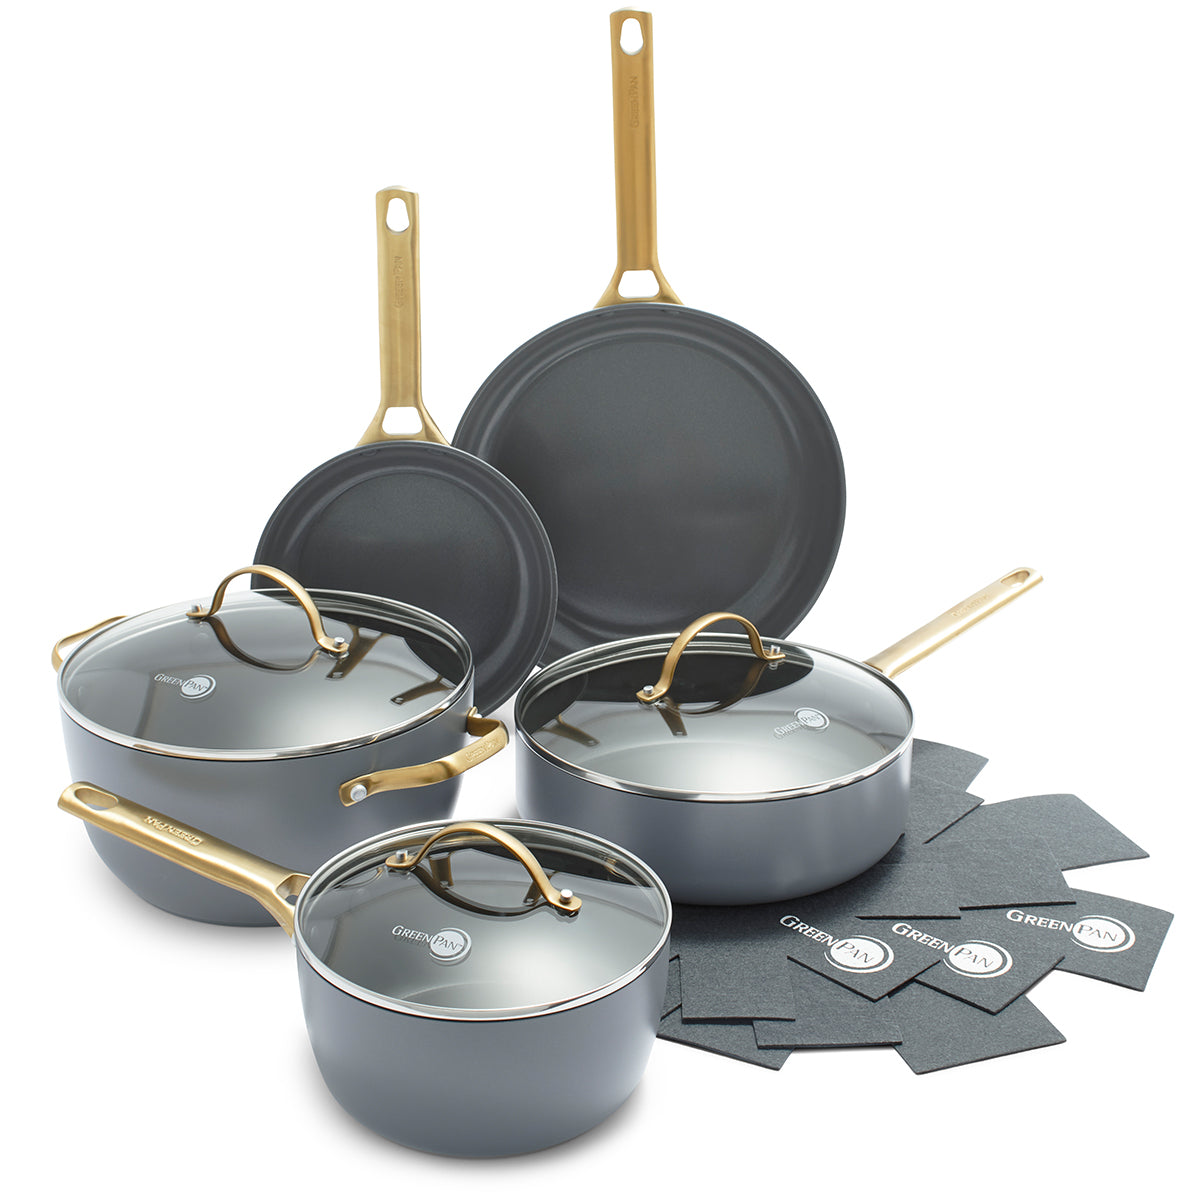 Thyme & Table Non-Stick 12 Piece Gold Pots And Pans Cookware Setcookware  pots and pans set